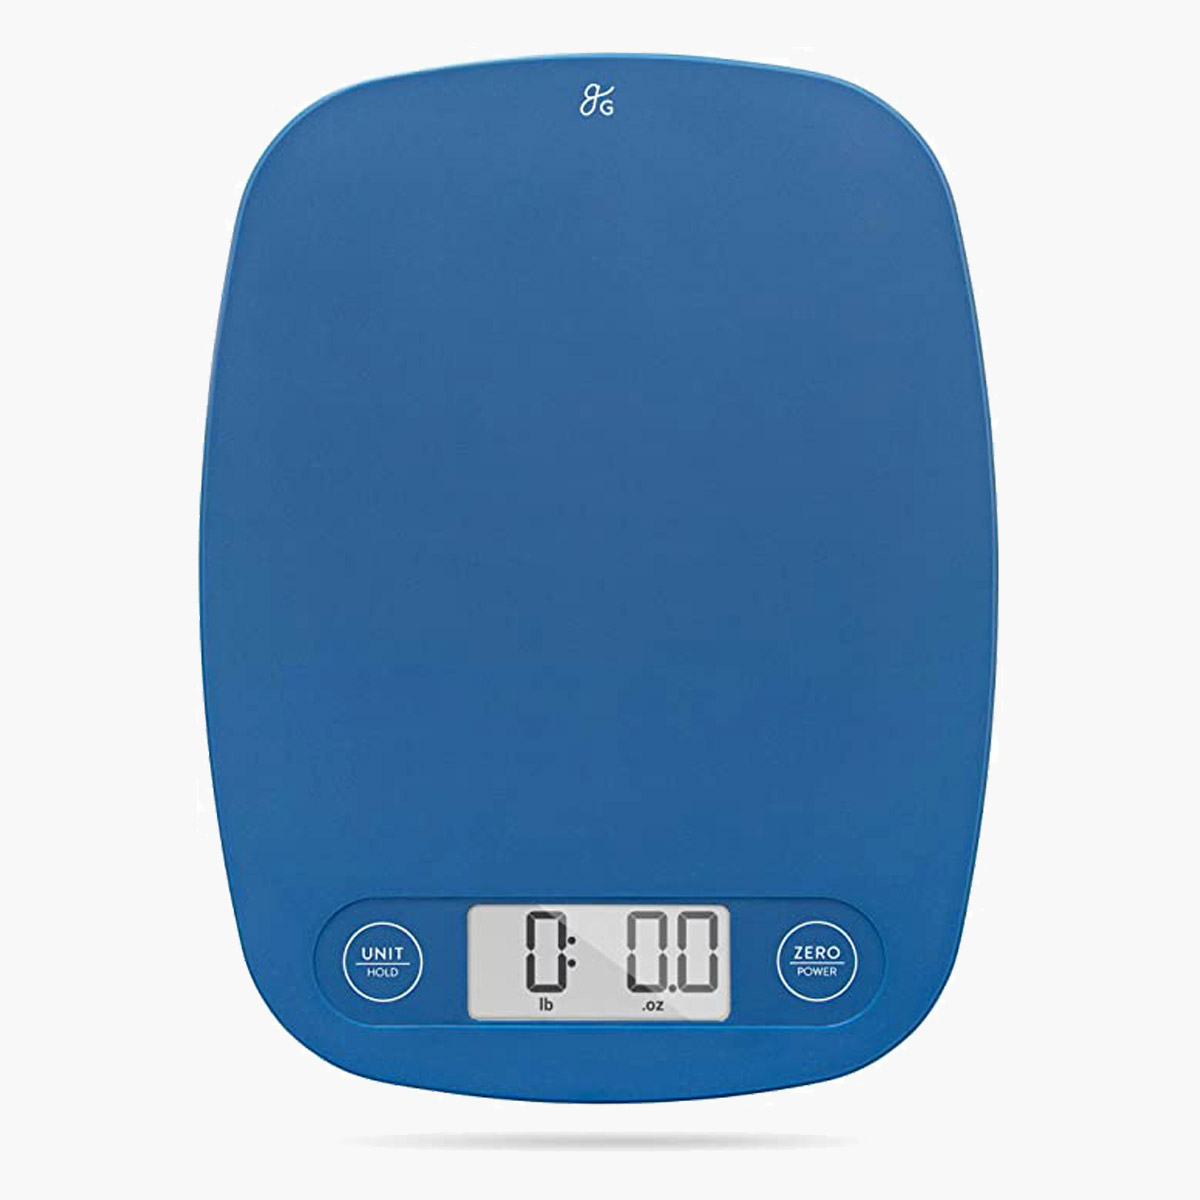 A blue Greater Good kitchen scale.